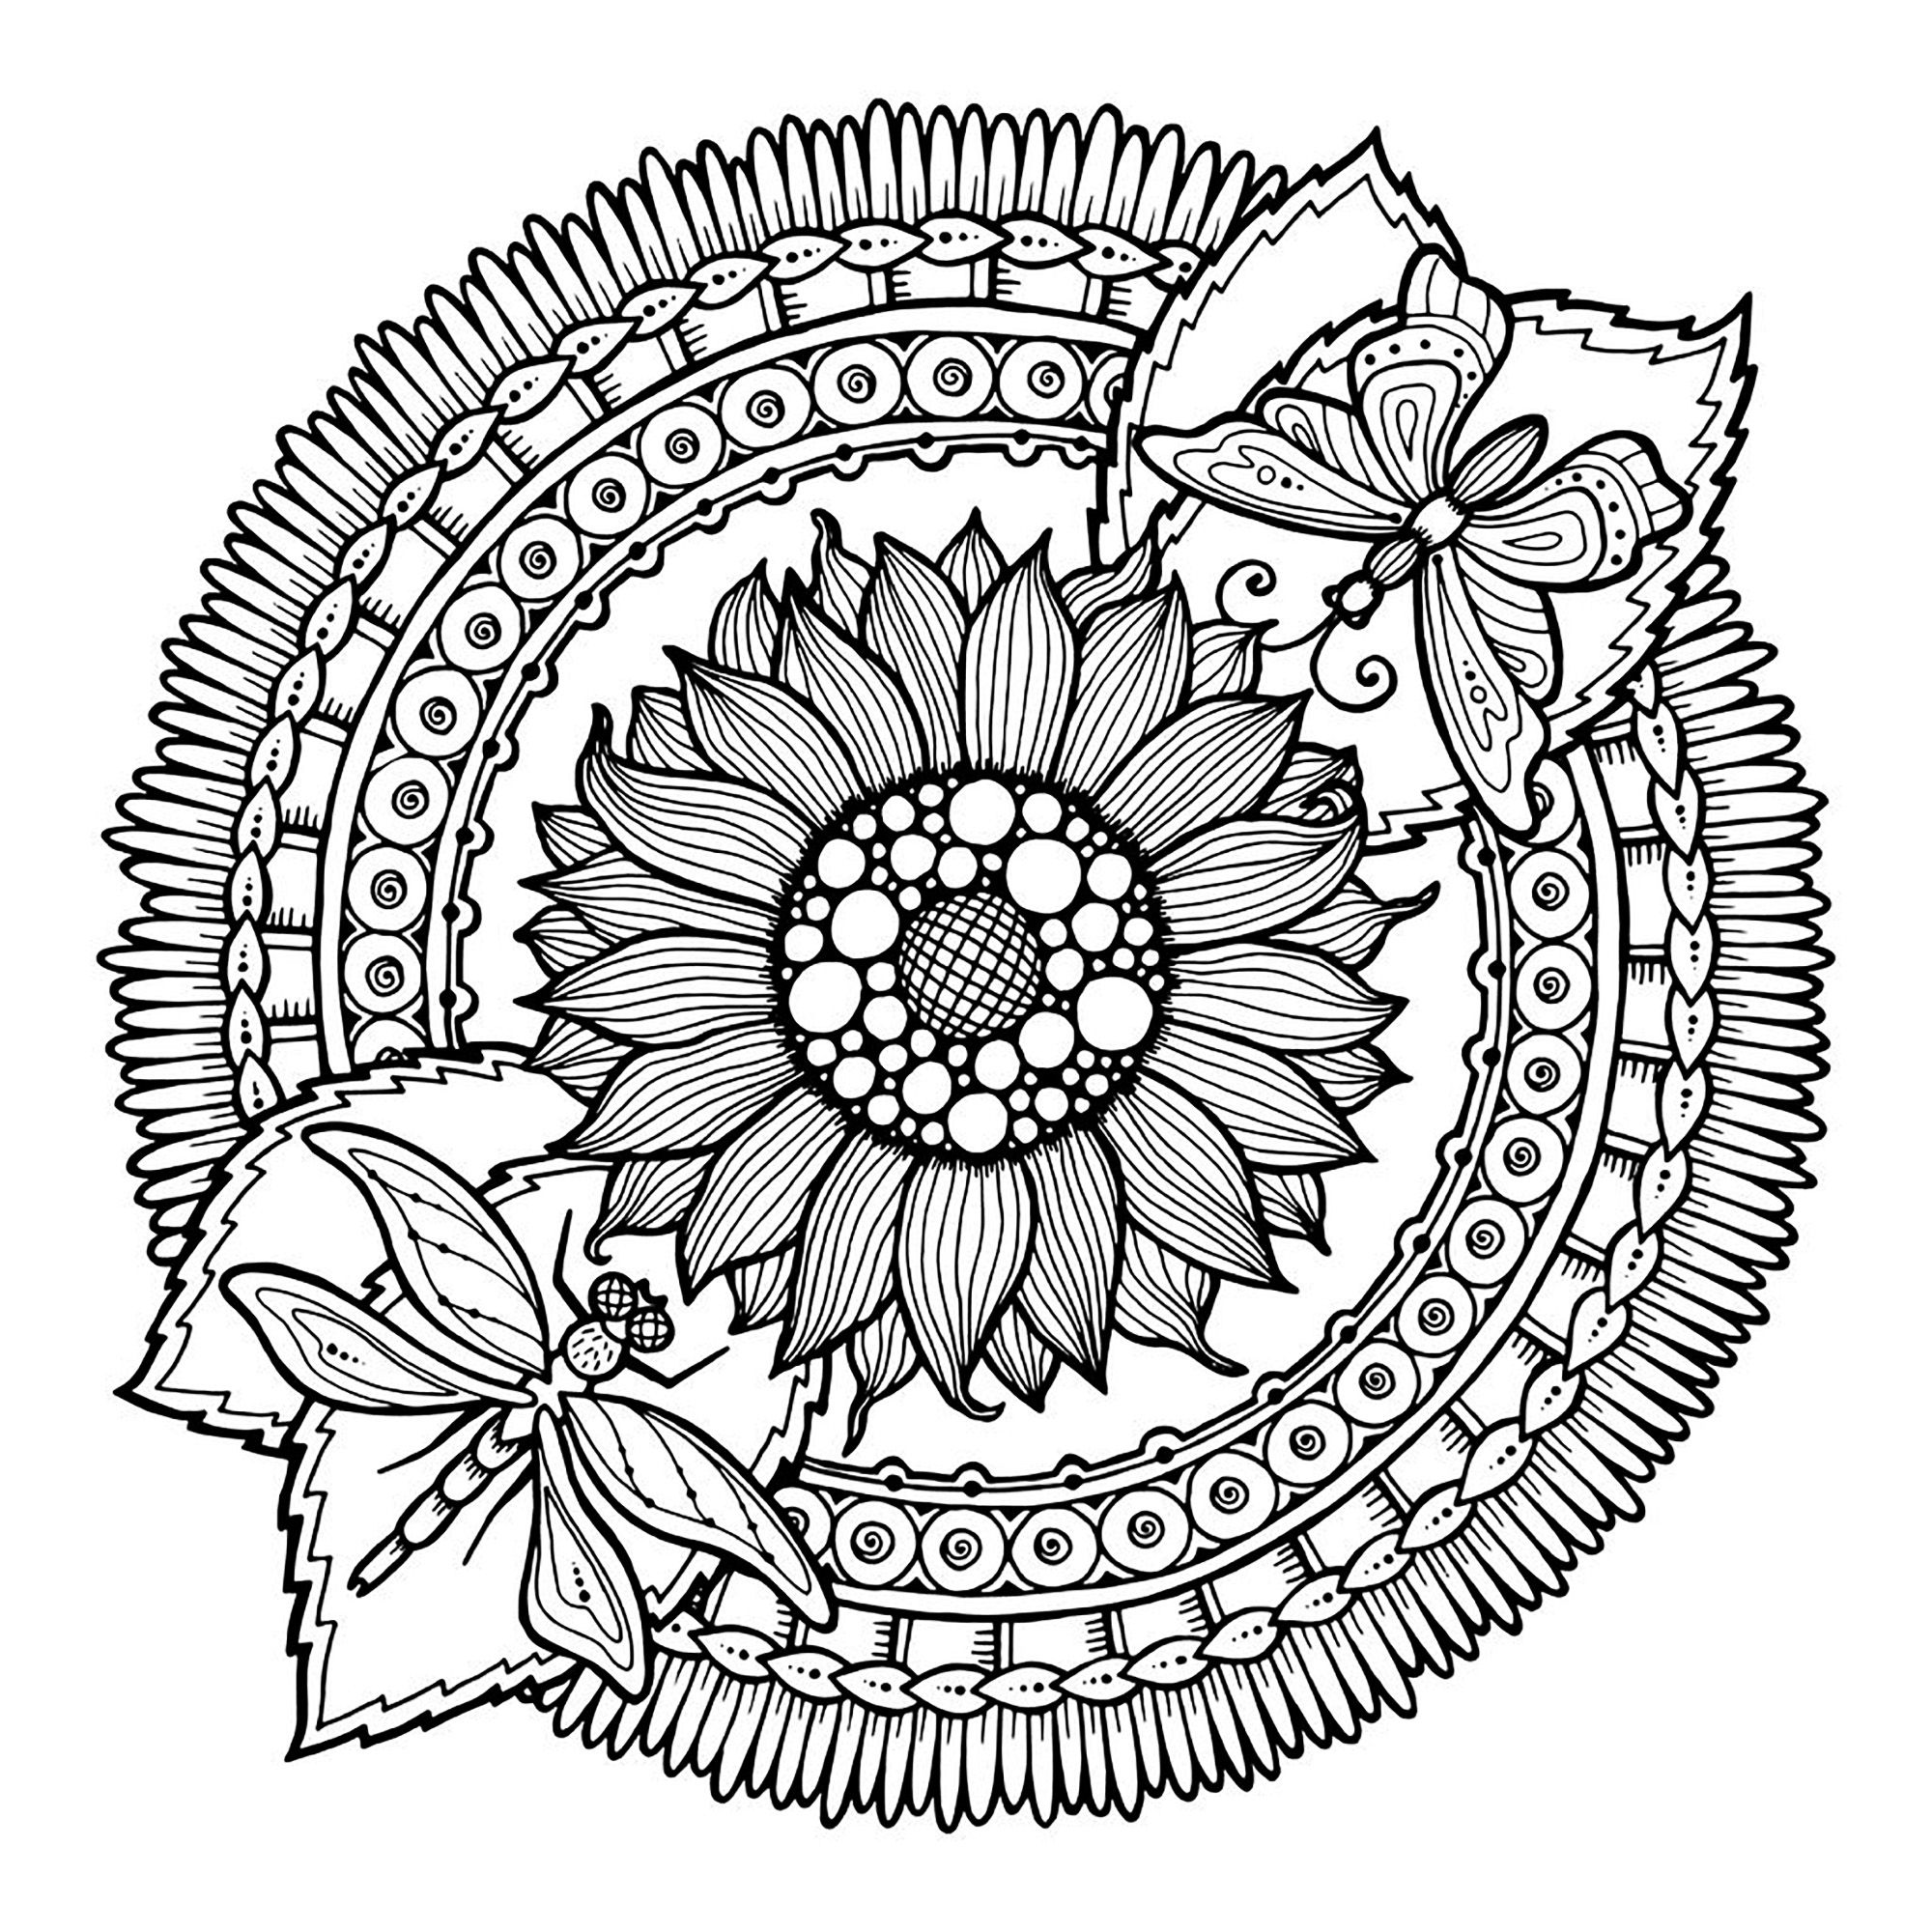 Sunflower and Butterflies ... Just beauty and harmony. Prepare your pens and pencils to color this Mandala full of small details and intricate areas. Feel free to let your instincts decide where to color, and what colors to choose.